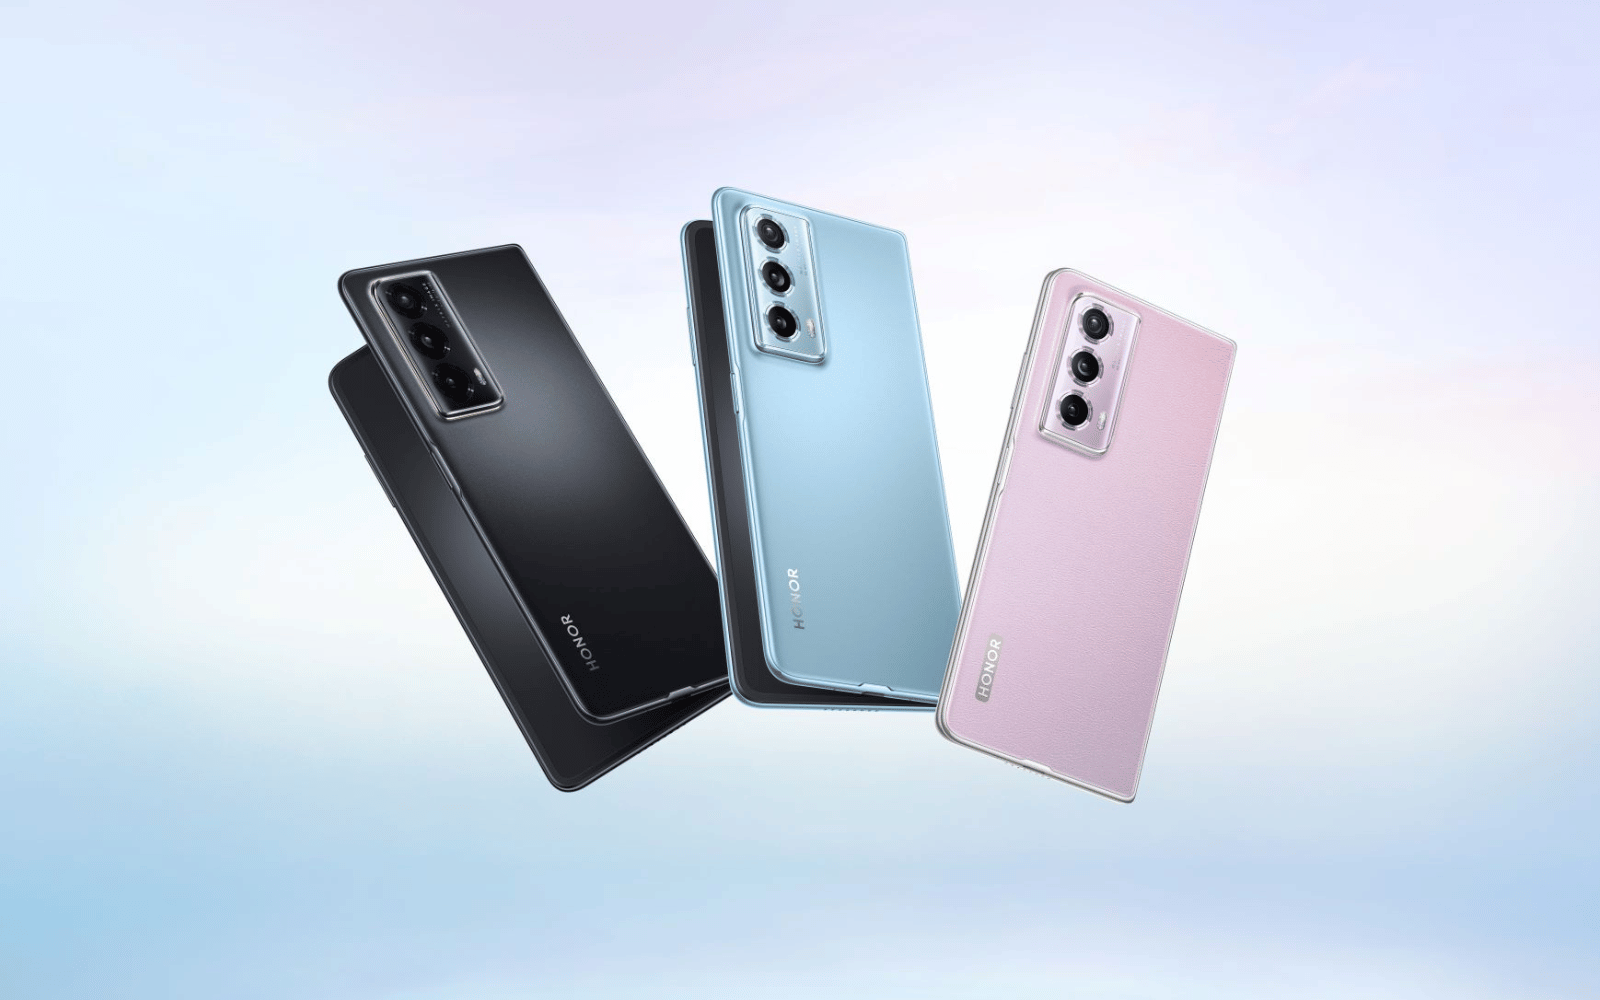 Honor shows Magic Vs2 and Watch 4 Pro in teaser images before launch -   News